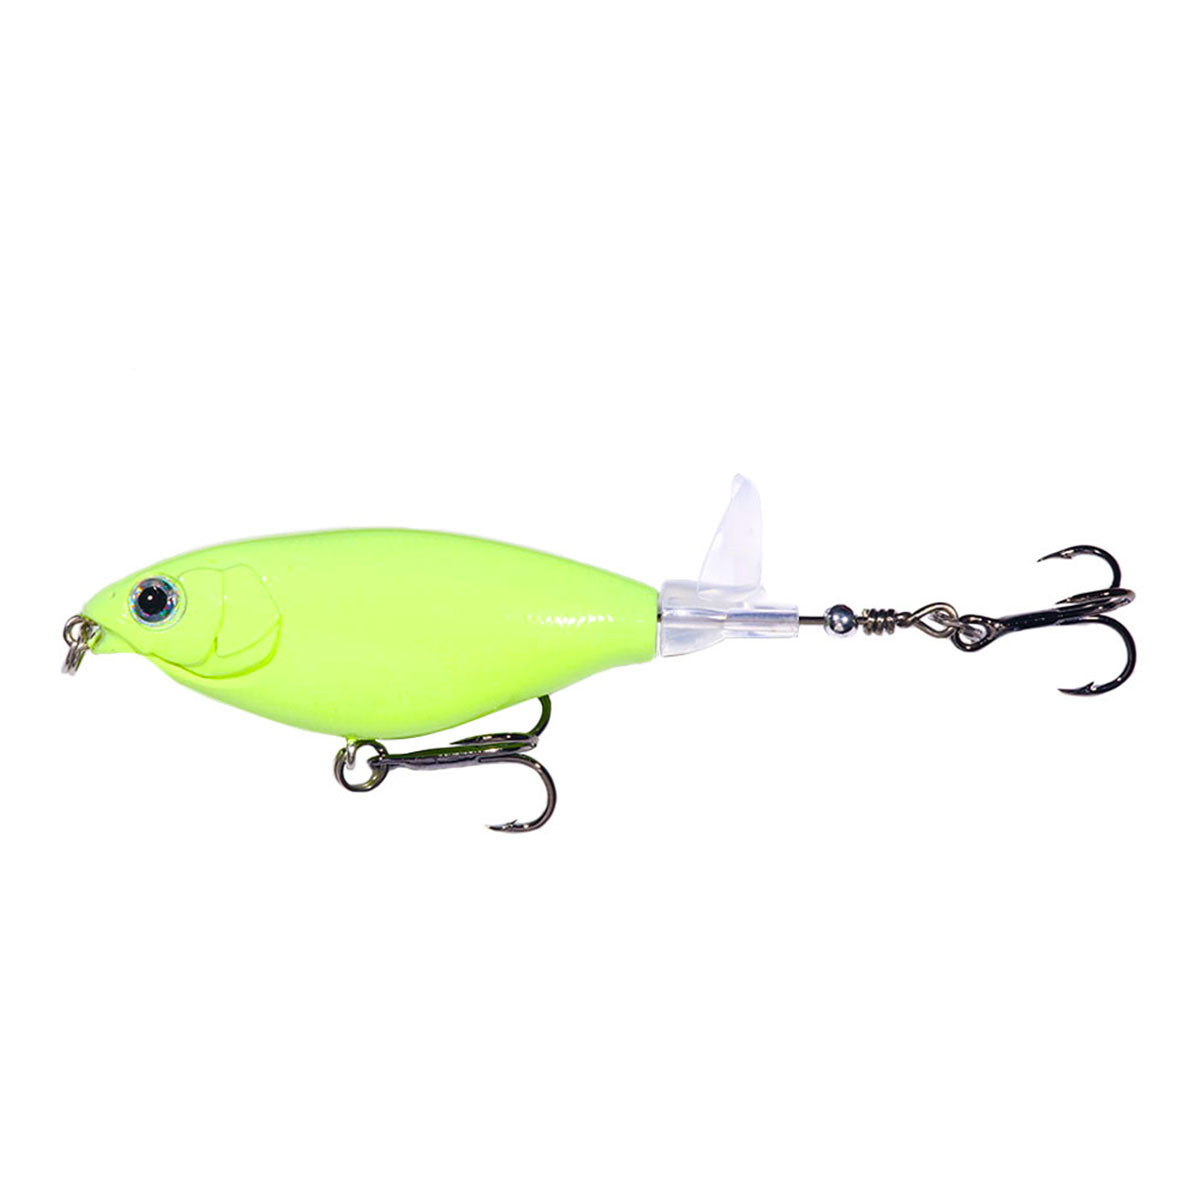 6G/11g Pencil Lure 7 colors available